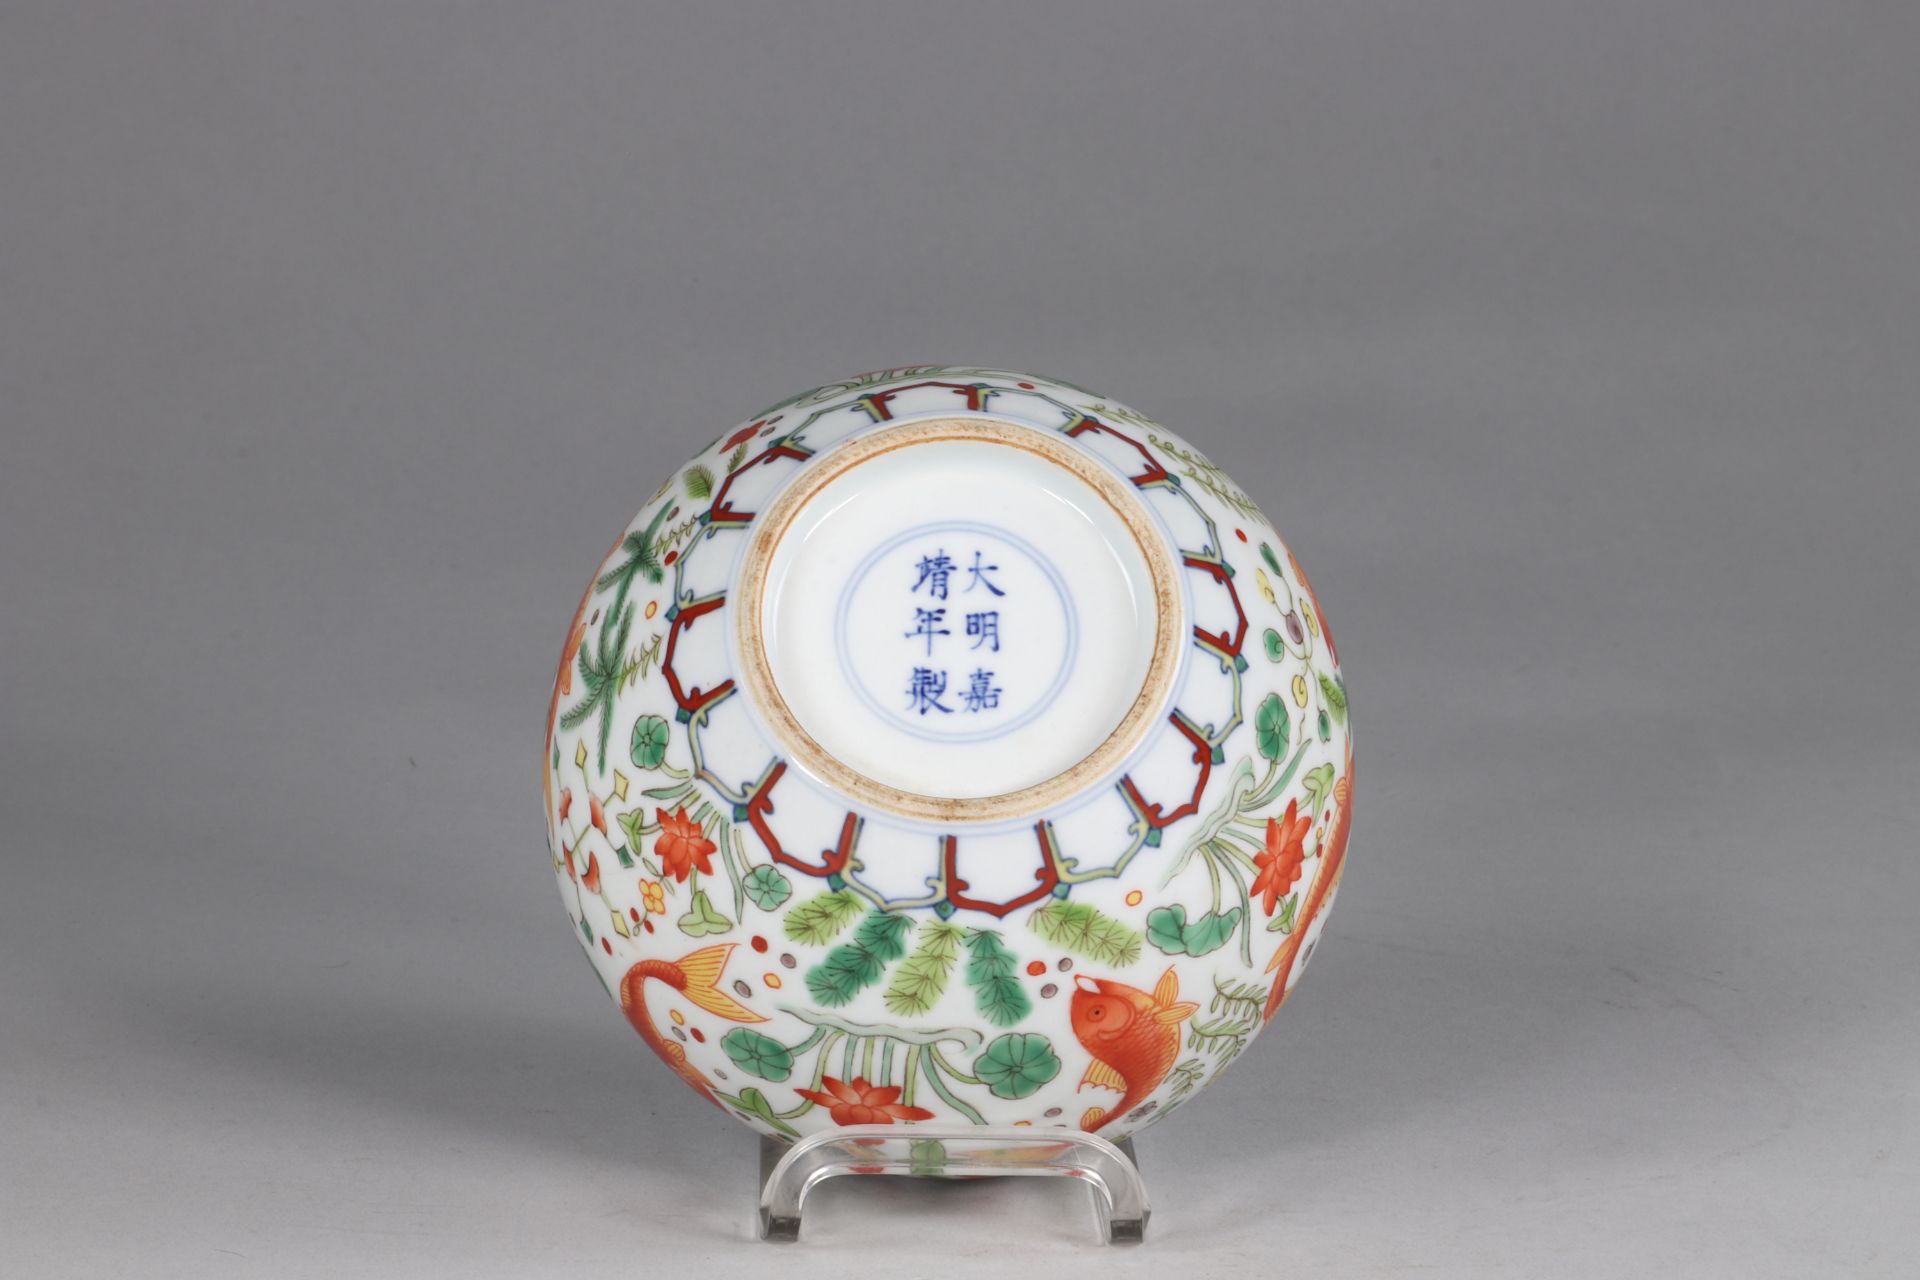 China DoucaI bowl, brand of Jia Jing, decorated with a pond of Lotus and carp - Image 7 of 8